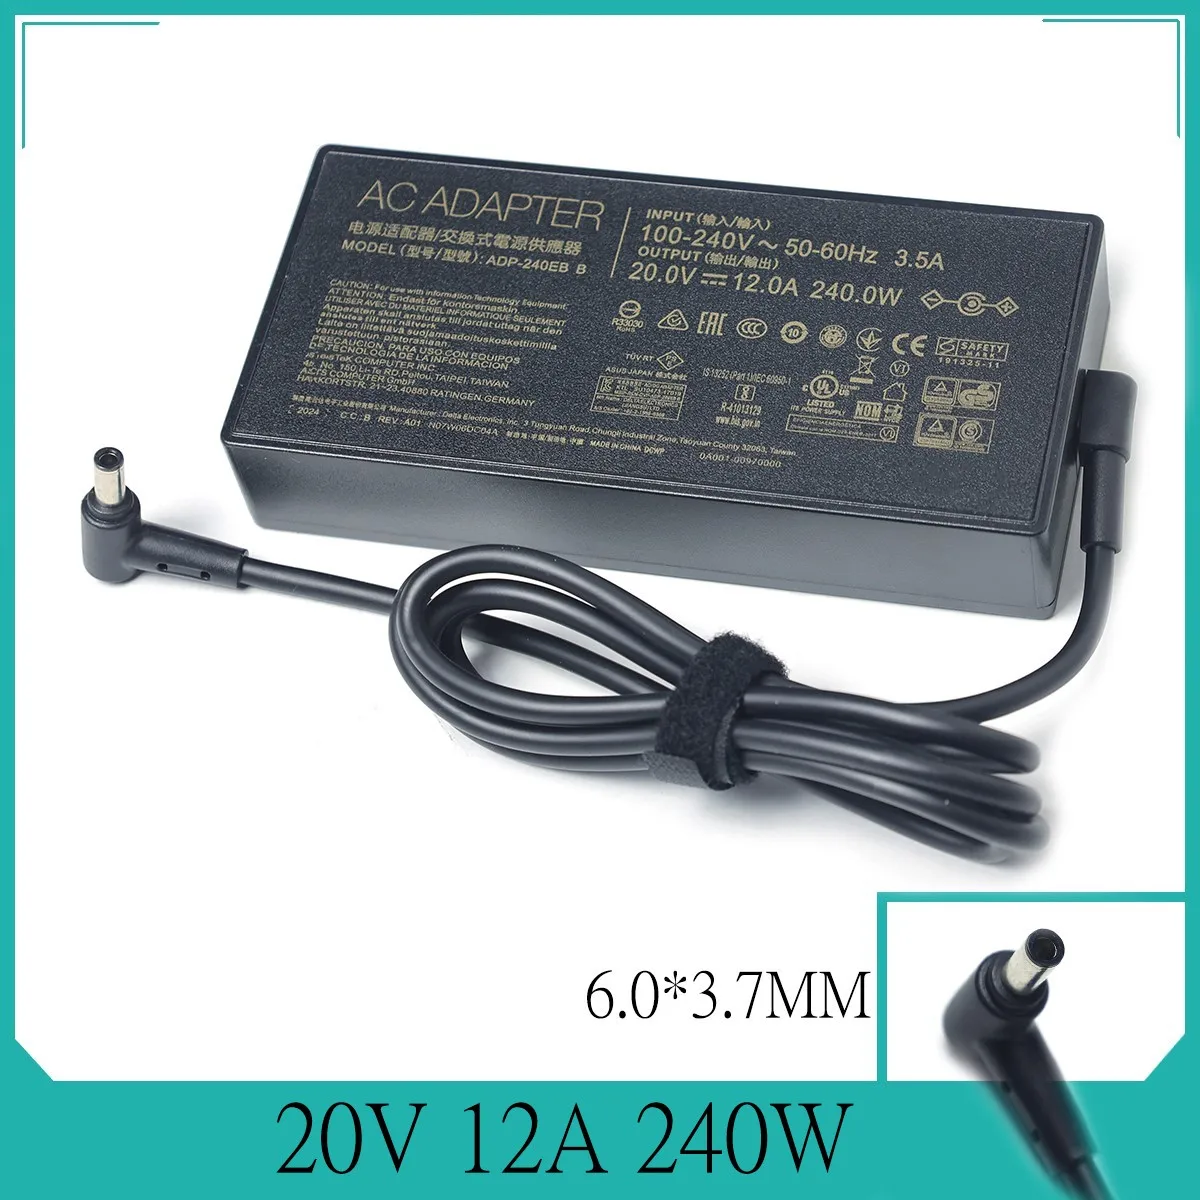 

ADP-240EB B 20V 12A 240W AC Adapter Laptop Charger For ASUS ROG 15 GX550LXS RTX2080 Power Supply 6.0 x 3.5mm